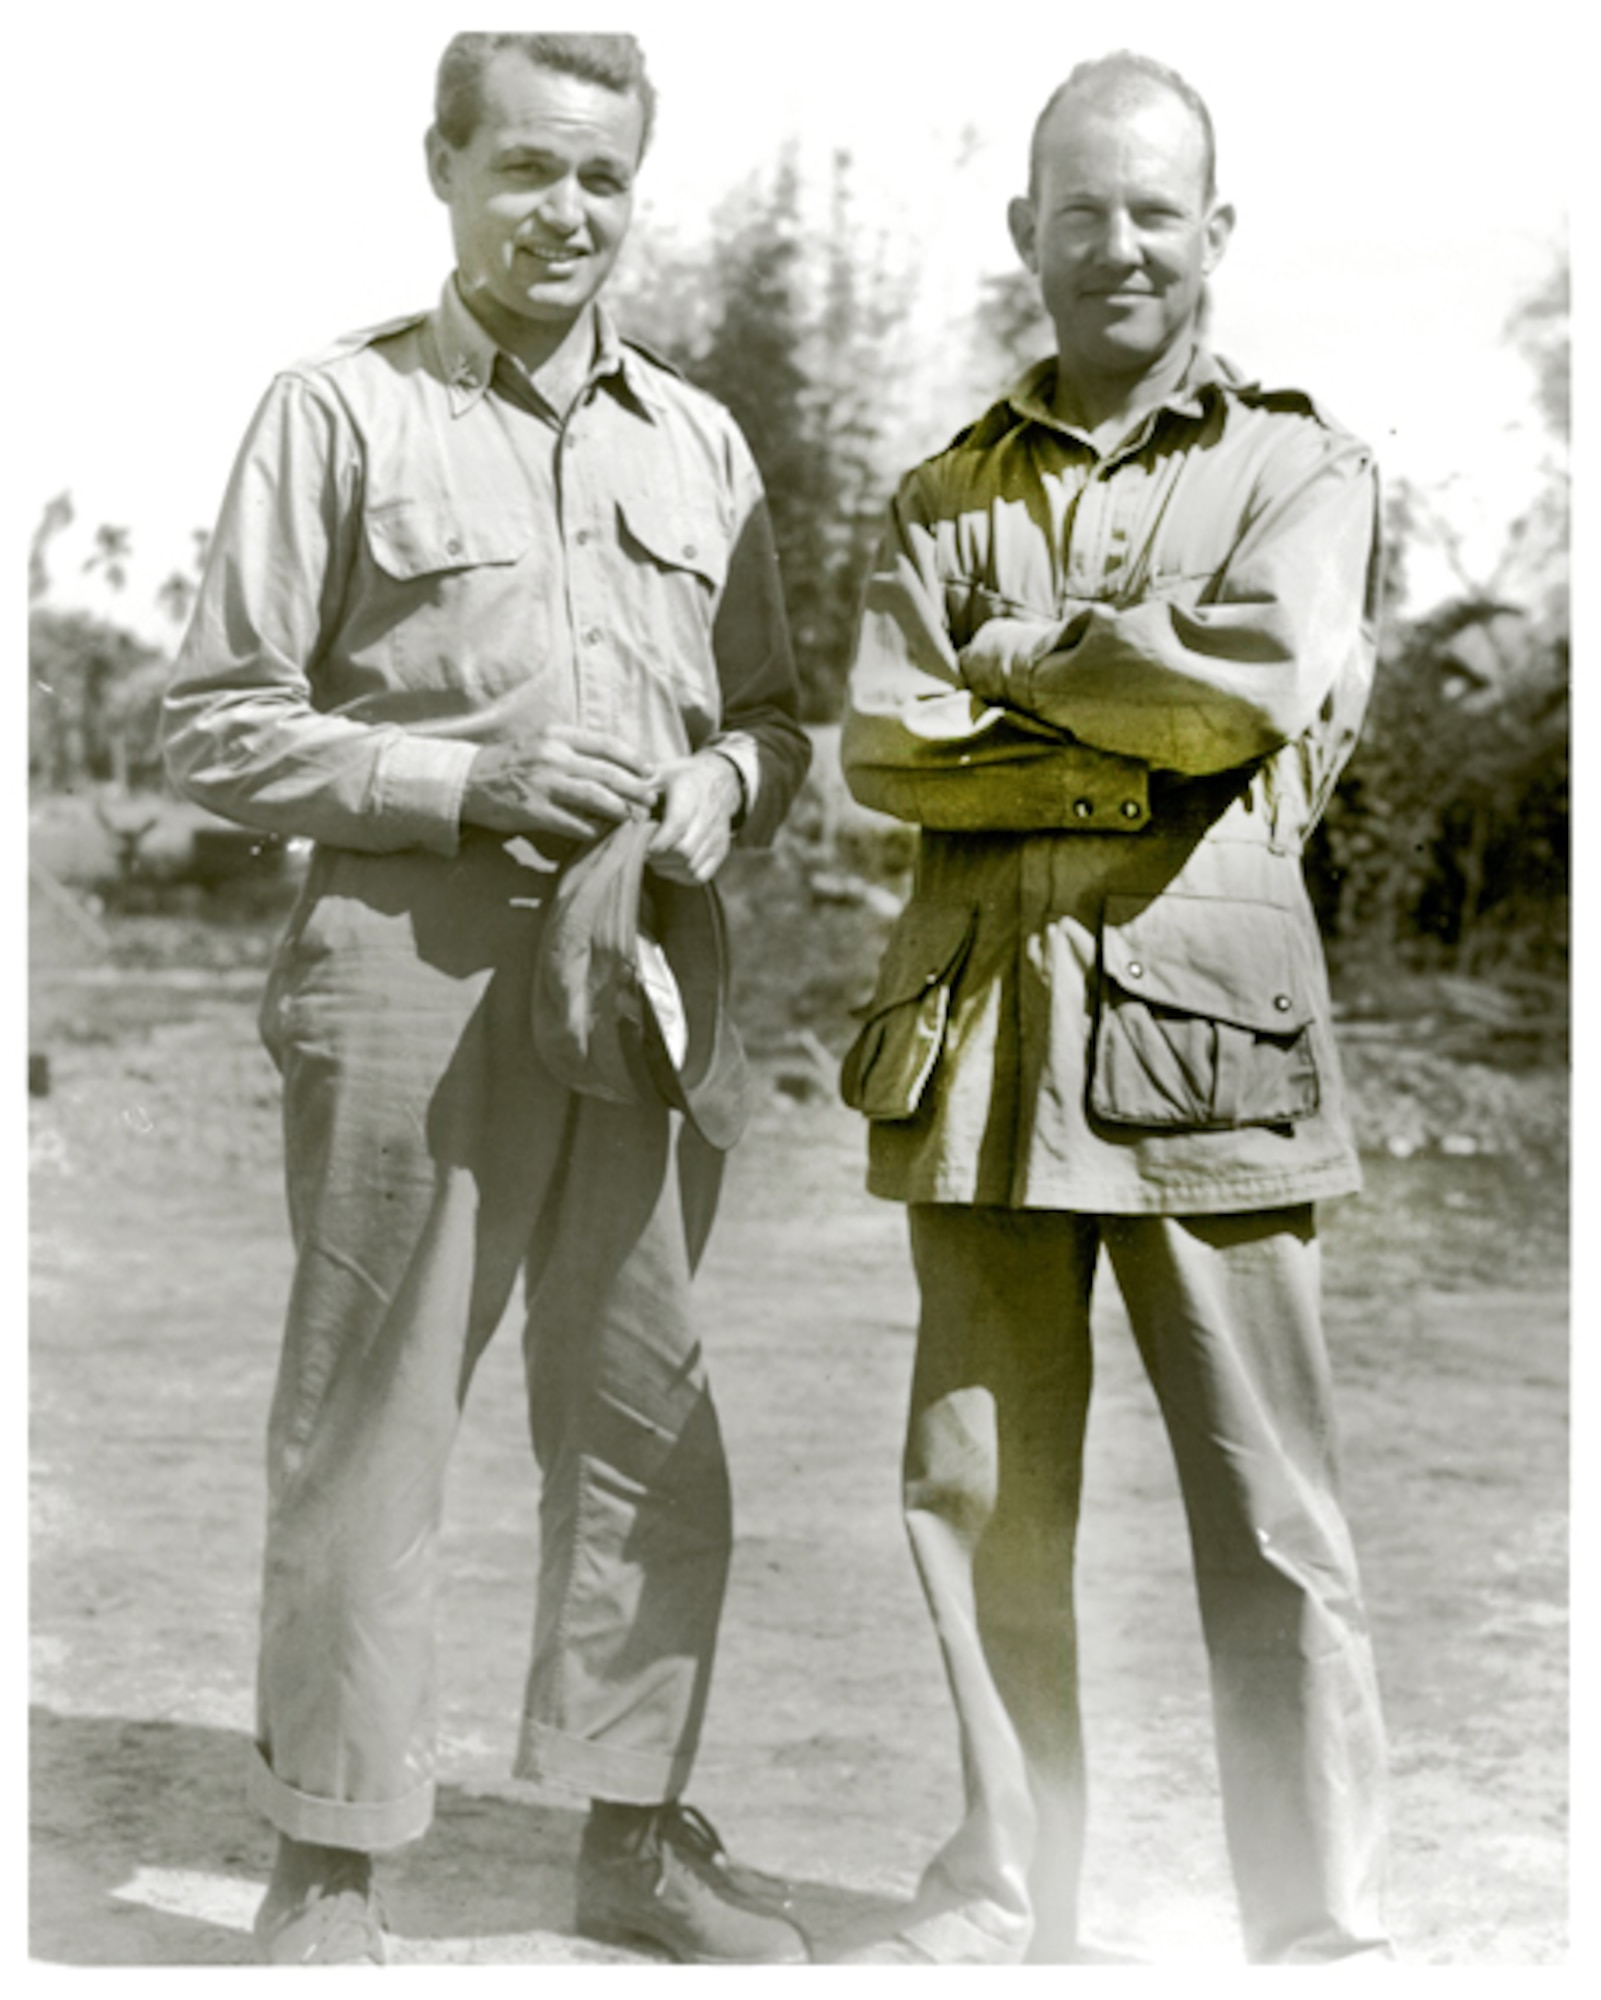 Col Phil Cochran and Col Johnny Alison, architects of World War II air commandos that operated from India against the Japanese empire.